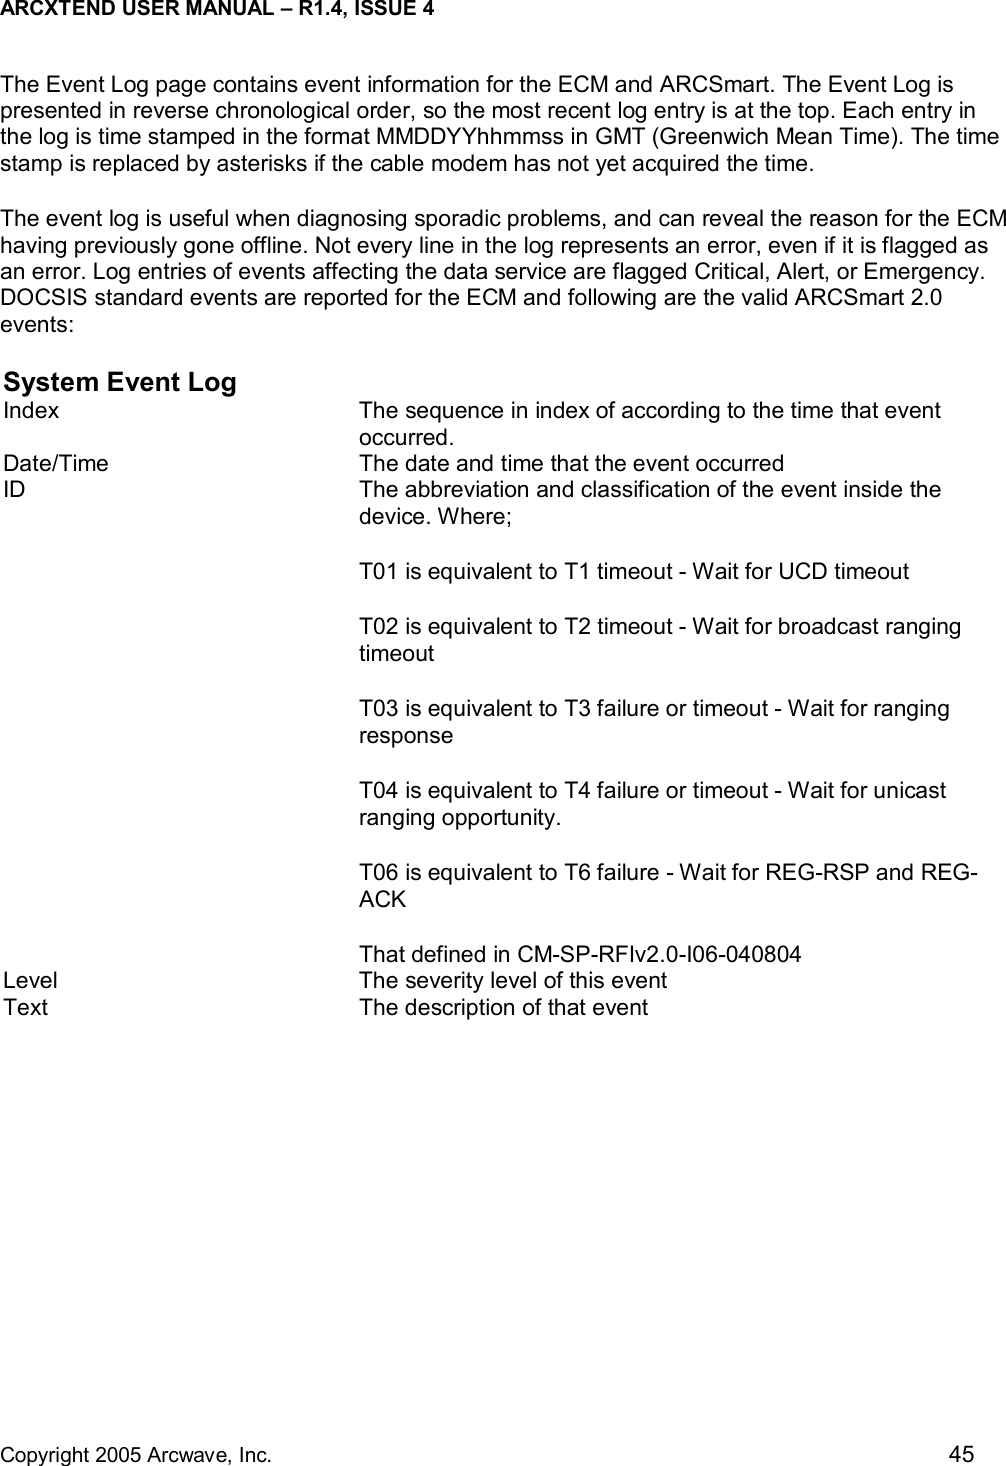 ARCXTEND USER MANUAL – R1.4, ISSUE 4  Copyright 2005 Arcwave, Inc.    45 The Event Log page contains event information for the ECM and ARCSmart. The Event Log is presented in reverse chronological order, so the most recent log entry is at the top. Each entry in the log is time stamped in the format MMDDYYhhmmss in GMT (Greenwich Mean Time). The time stamp is replaced by asterisks if the cable modem has not yet acquired the time. The event log is useful when diagnosing sporadic problems, and can reveal the reason for the ECM having previously gone offline. Not every line in the log represents an error, even if it is flagged as an error. Log entries of events affecting the data service are flagged Critical, Alert, or Emergency. DOCSIS standard events are reported for the ECM and following are the valid ARCSmart 2.0 events: System Event Log Index  The sequence in index of according to the time that event occurred. Date/Time  The date and time that the event occurred ID  The abbreviation and classification of the event inside the device. Where; T01 is equivalent to T1 timeout - Wait for UCD timeout T02 is equivalent to T2 timeout - Wait for broadcast ranging timeout T03 is equivalent to T3 failure or timeout - Wait for ranging response T04 is equivalent to T4 failure or timeout - Wait for unicast ranging opportunity. T06 is equivalent to T6 failure - Wait for REG-RSP and REG-ACK That defined in CM-SP-RFIv2.0-I06-040804 Level  The severity level of this event Text  The description of that event   